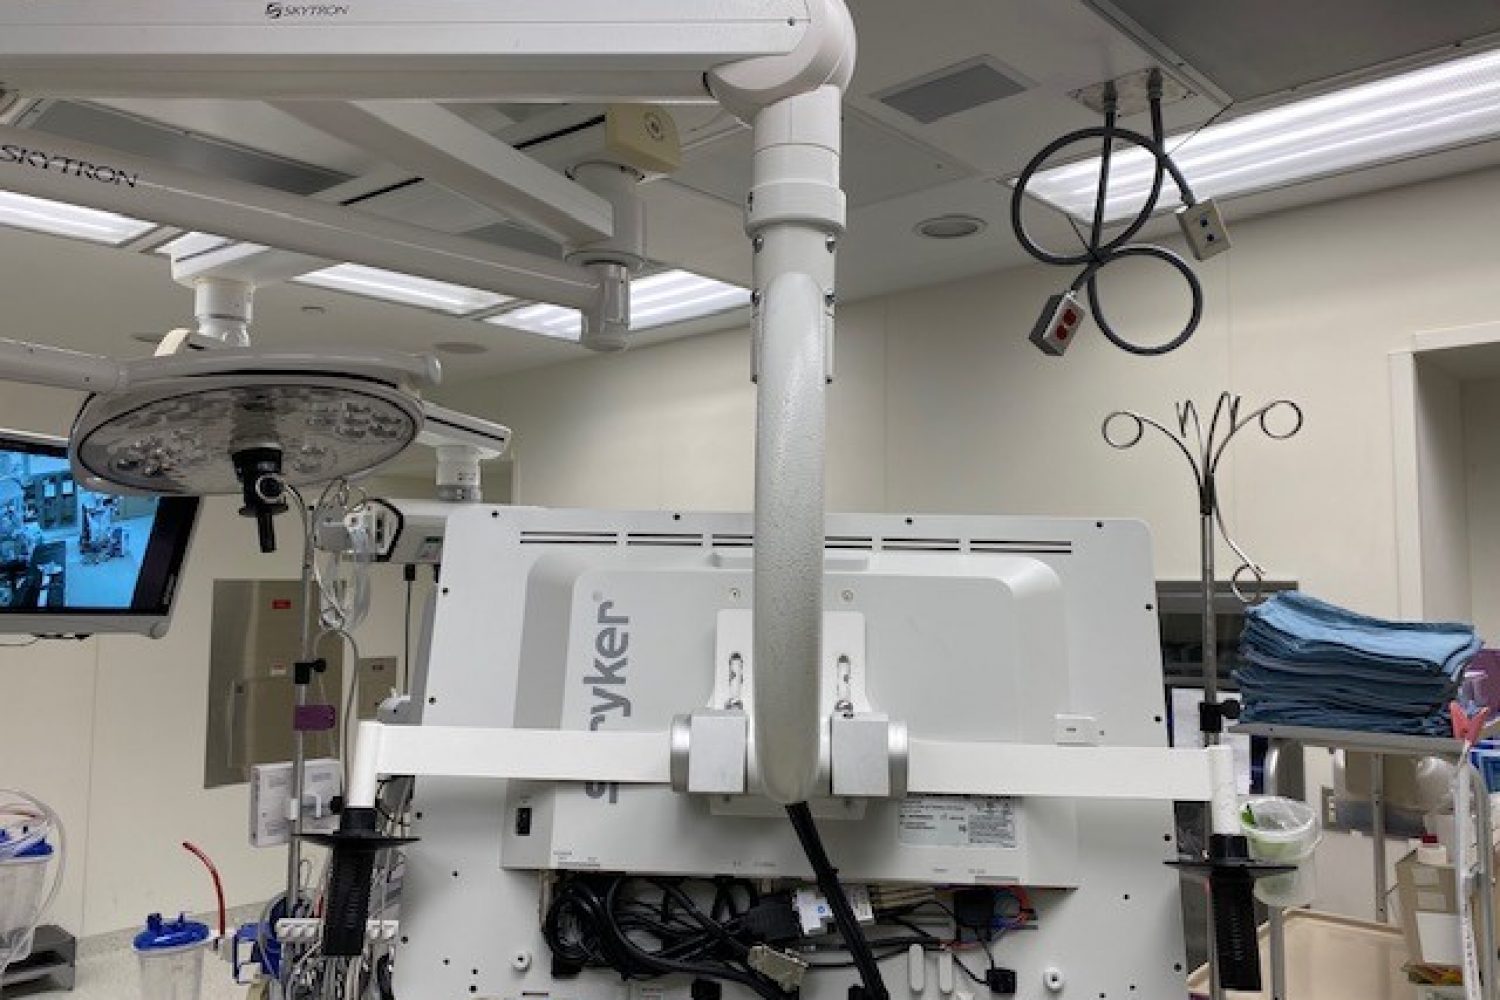 Skytron Spring Arm Replacement at Athens Regional Medical Center